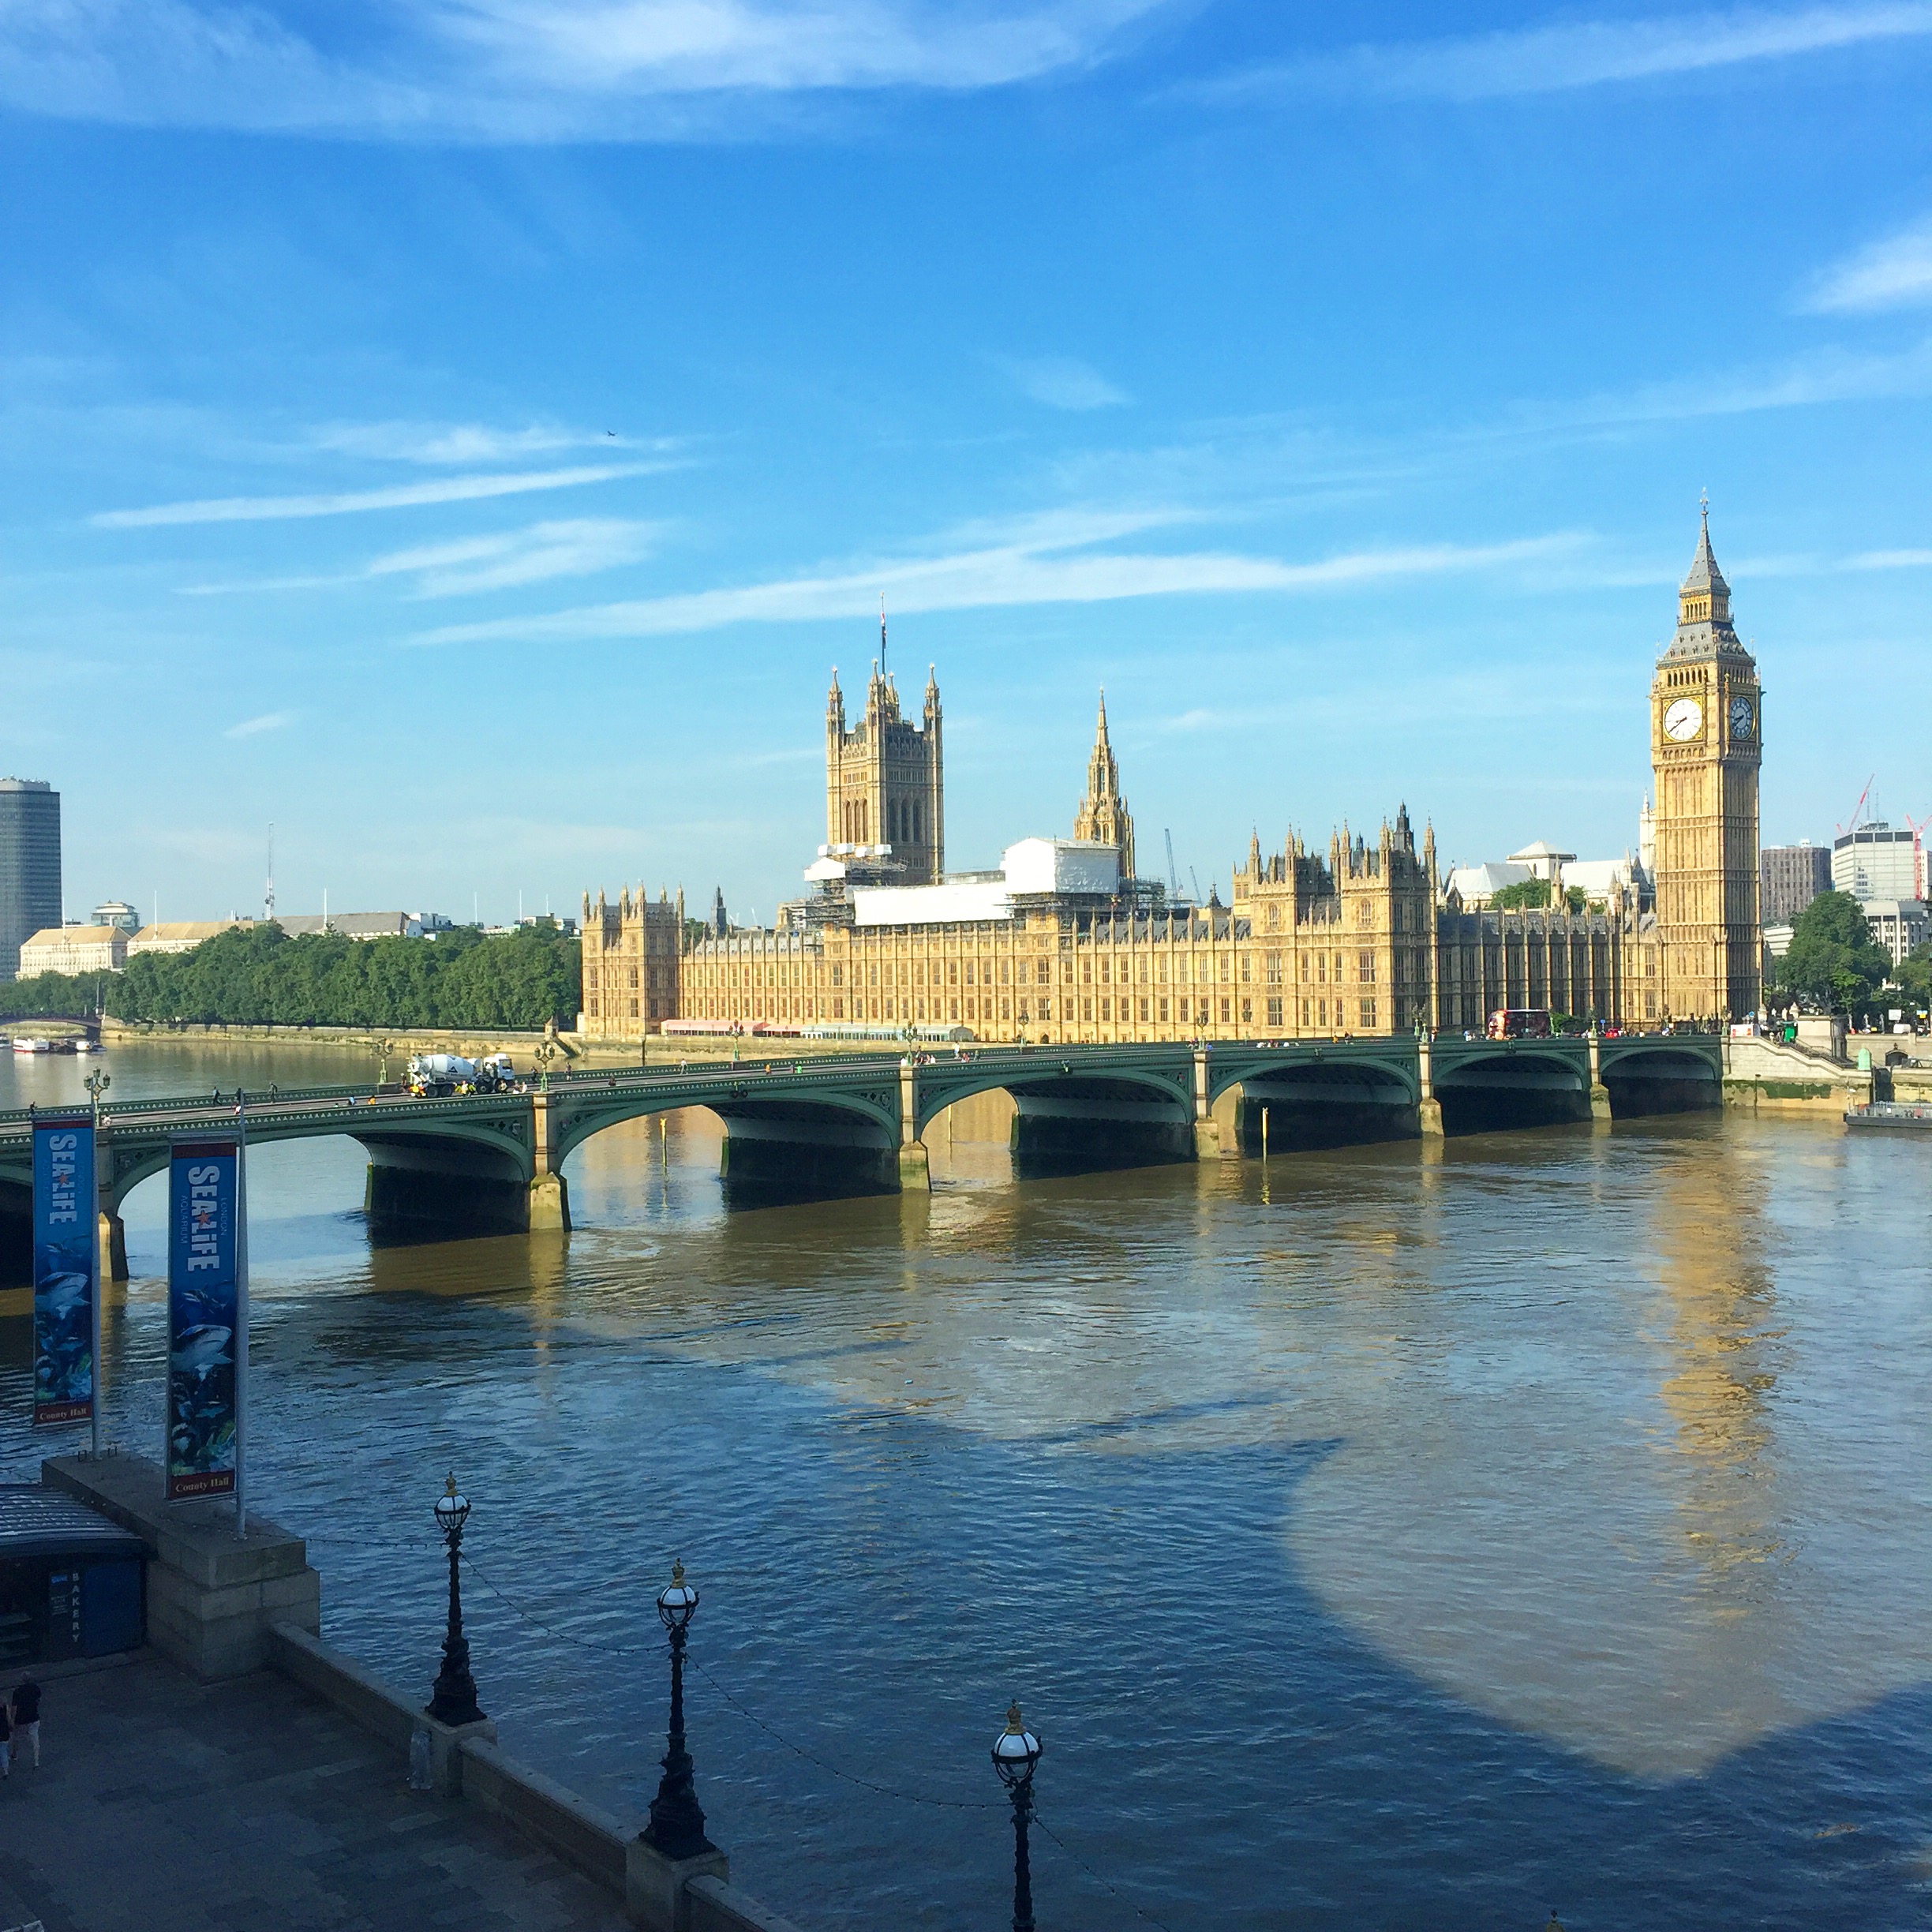 View of Big Ben and the Houses of Parliament from Marriott County Hall